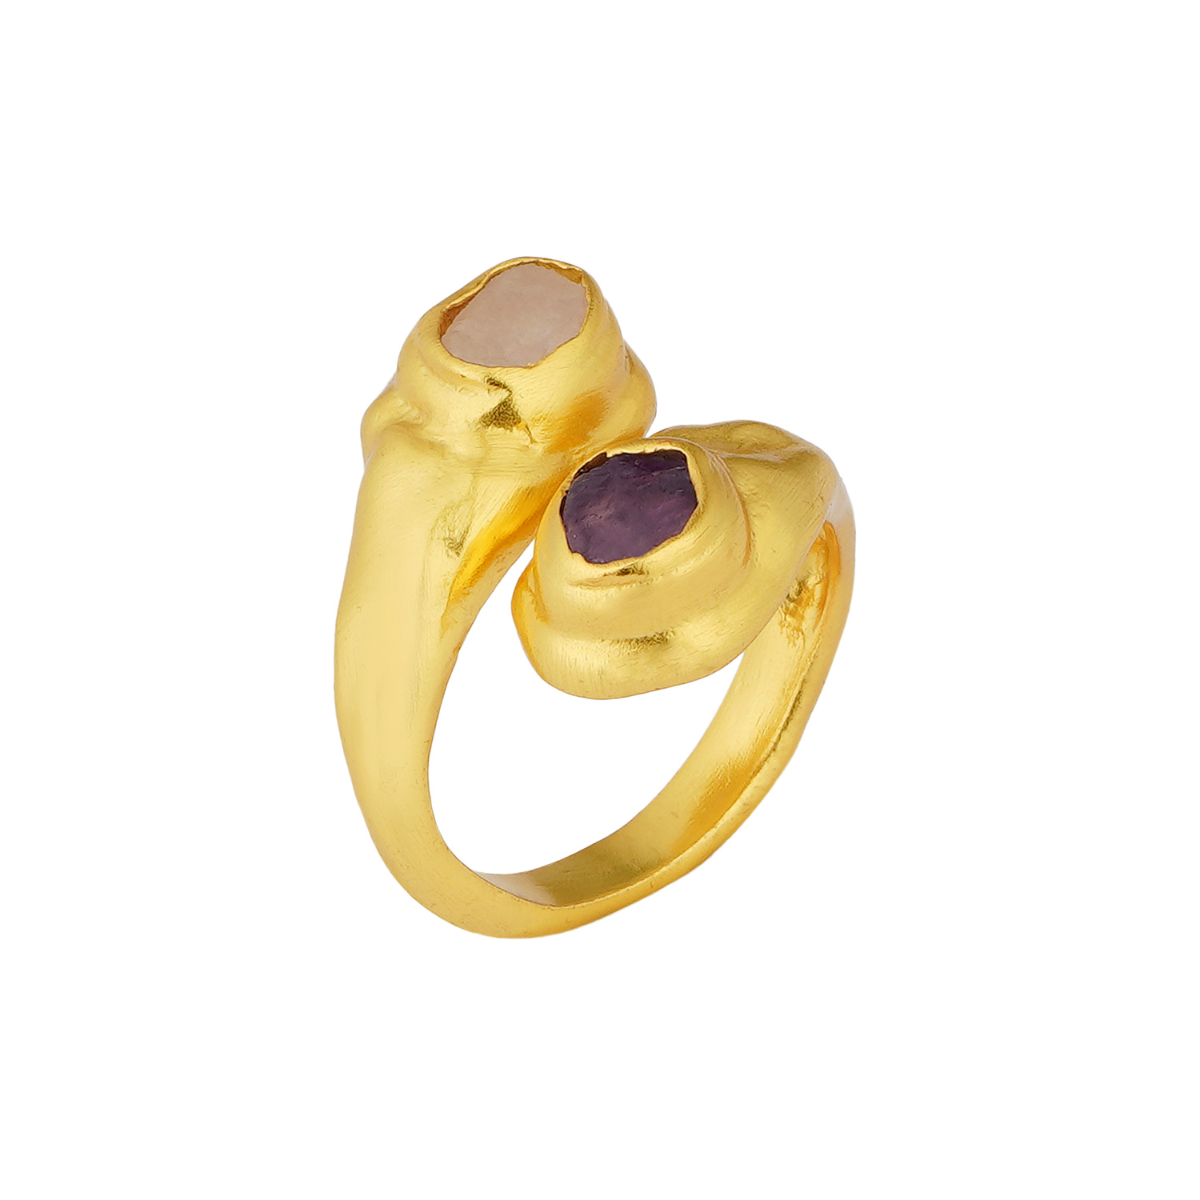 Molten Two Statement Ring with Rose Quartz and Amethyst